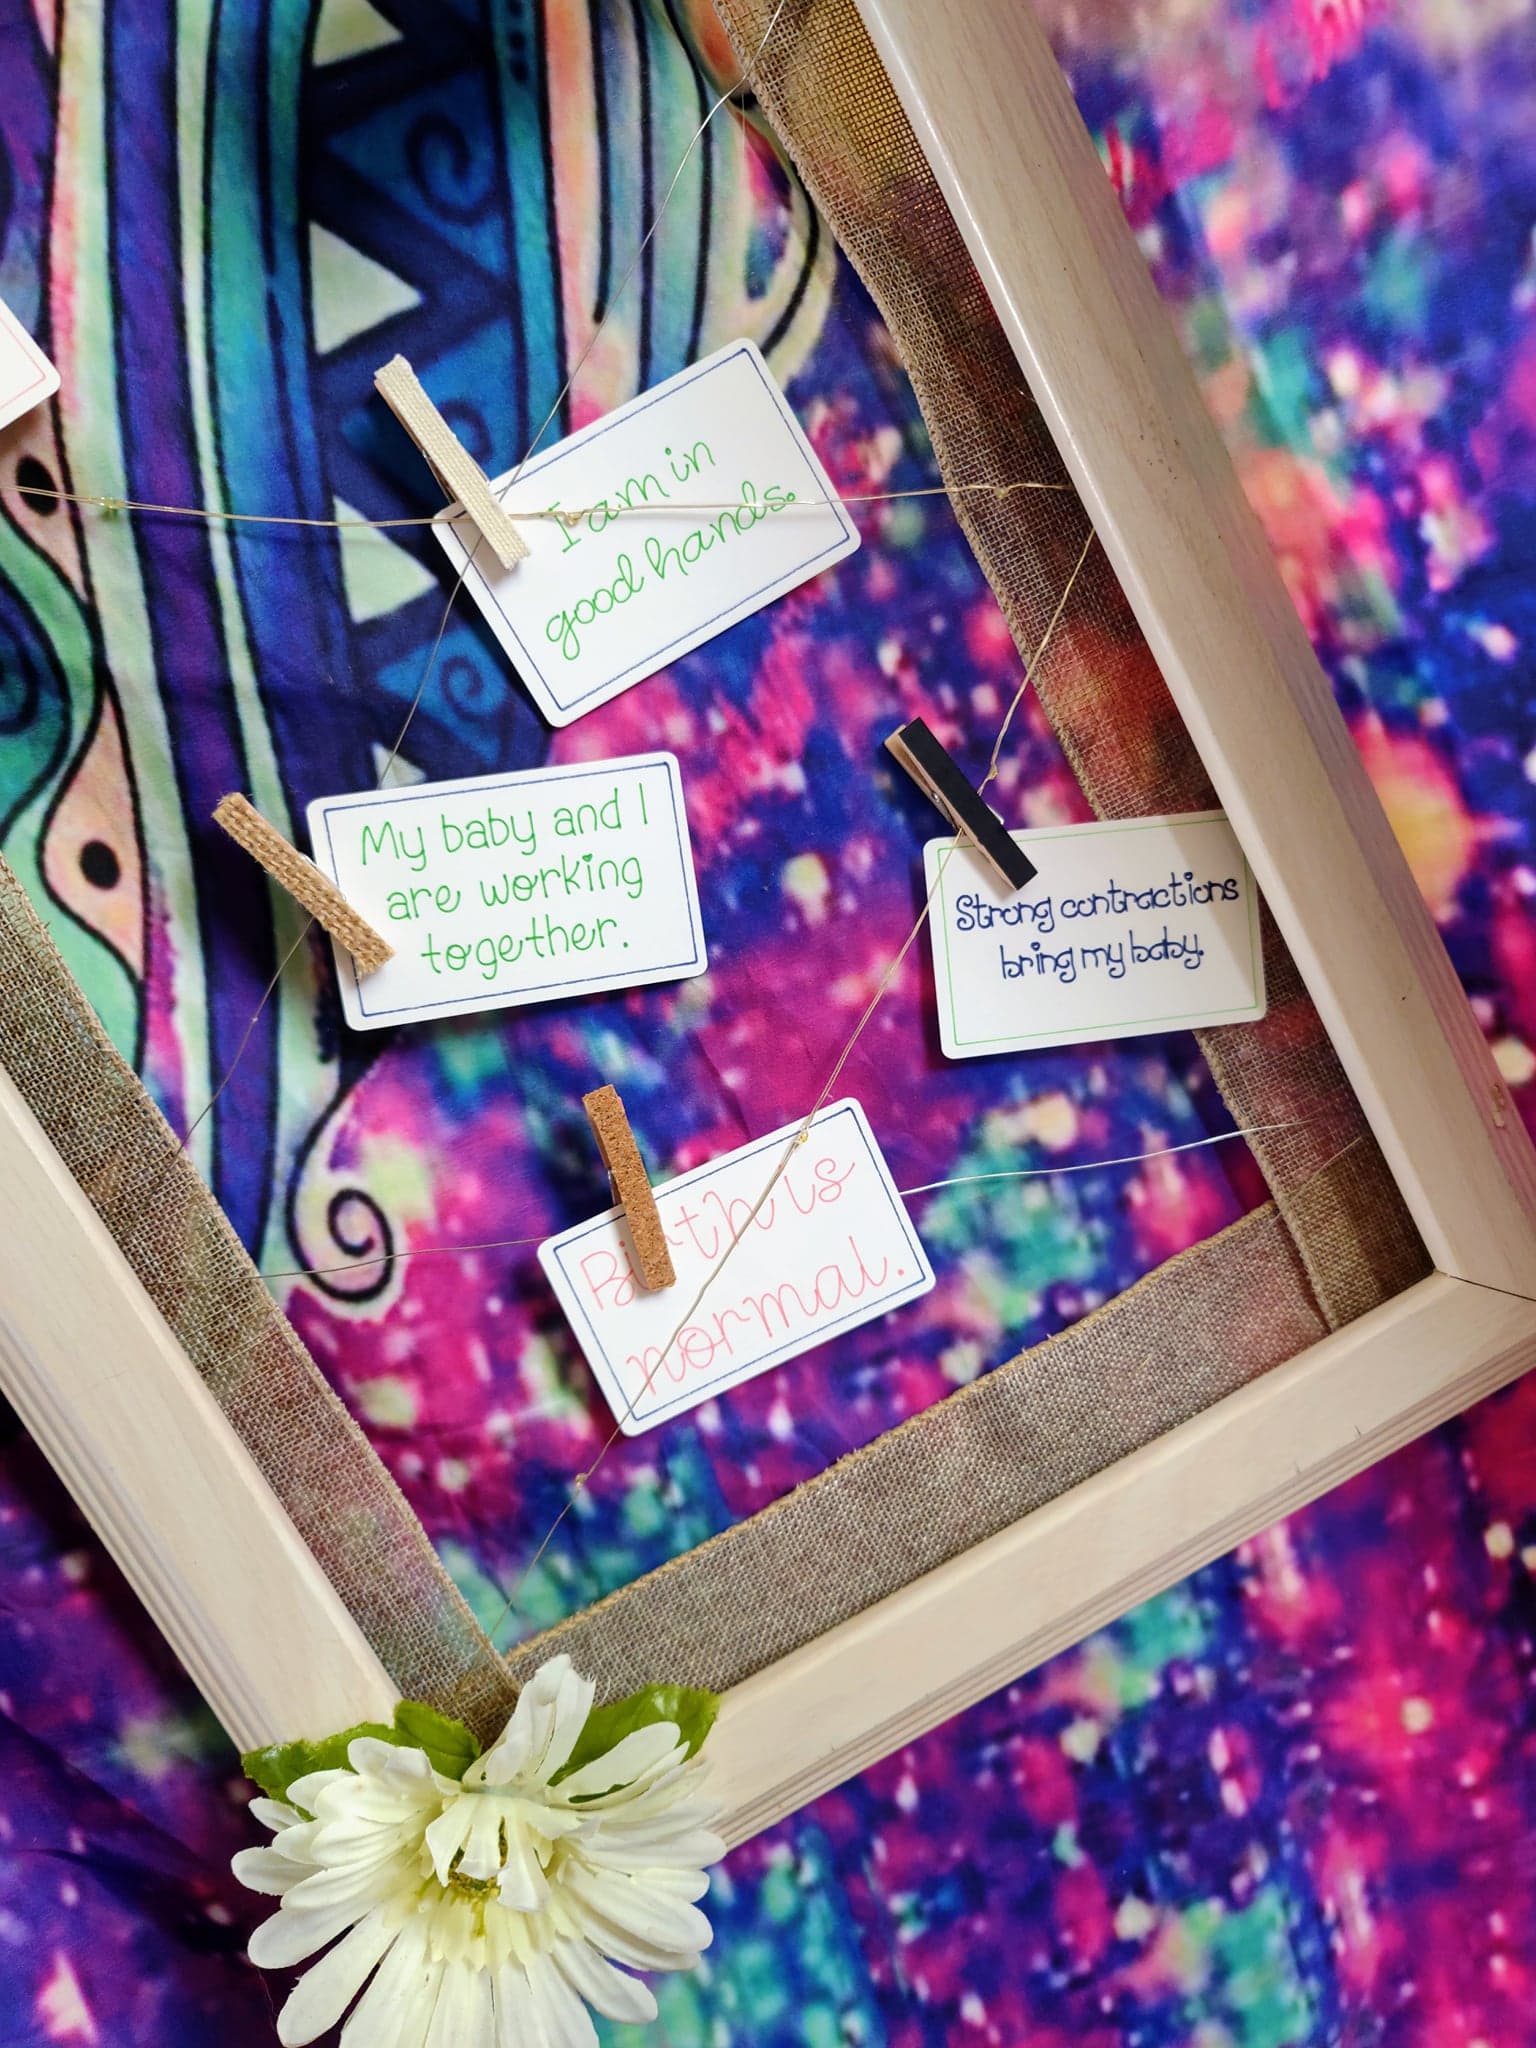 Photograph of several birth affirmation cards displayed artistically in a wood frame clipped to wires. The affirmations say: "I am in good hands." "My baby and I are working together." "Strong contractions bring my baby." and "Birth is normal."